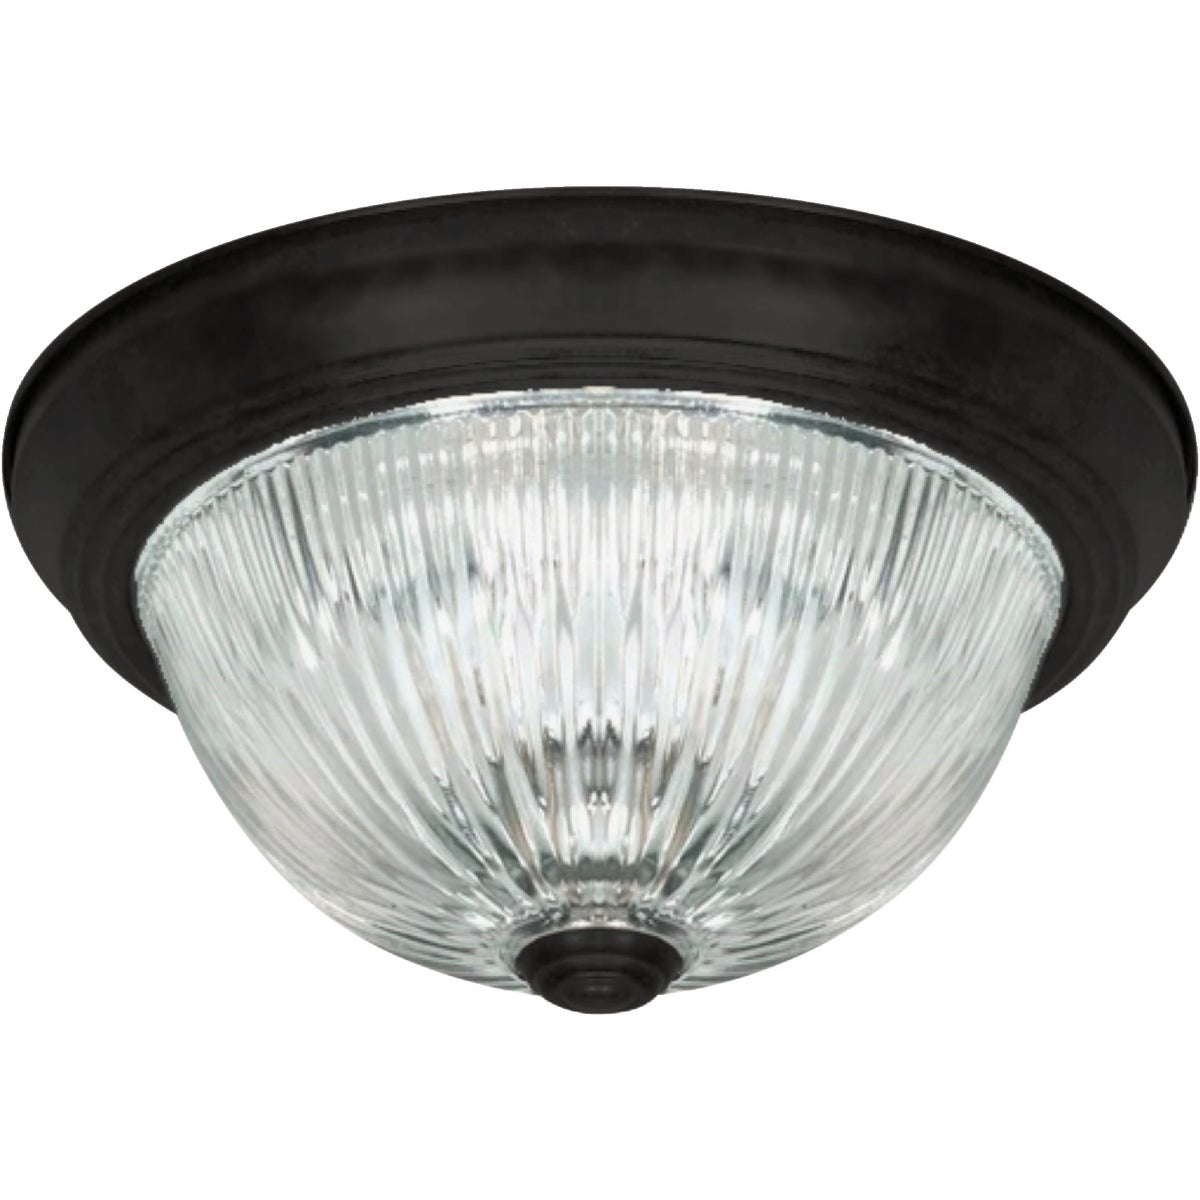 Home Impressions IFM211MBK-CR Home Impressions 11 In. Matte Black Flush Mount, Clear Glass IFM211MBK-CR